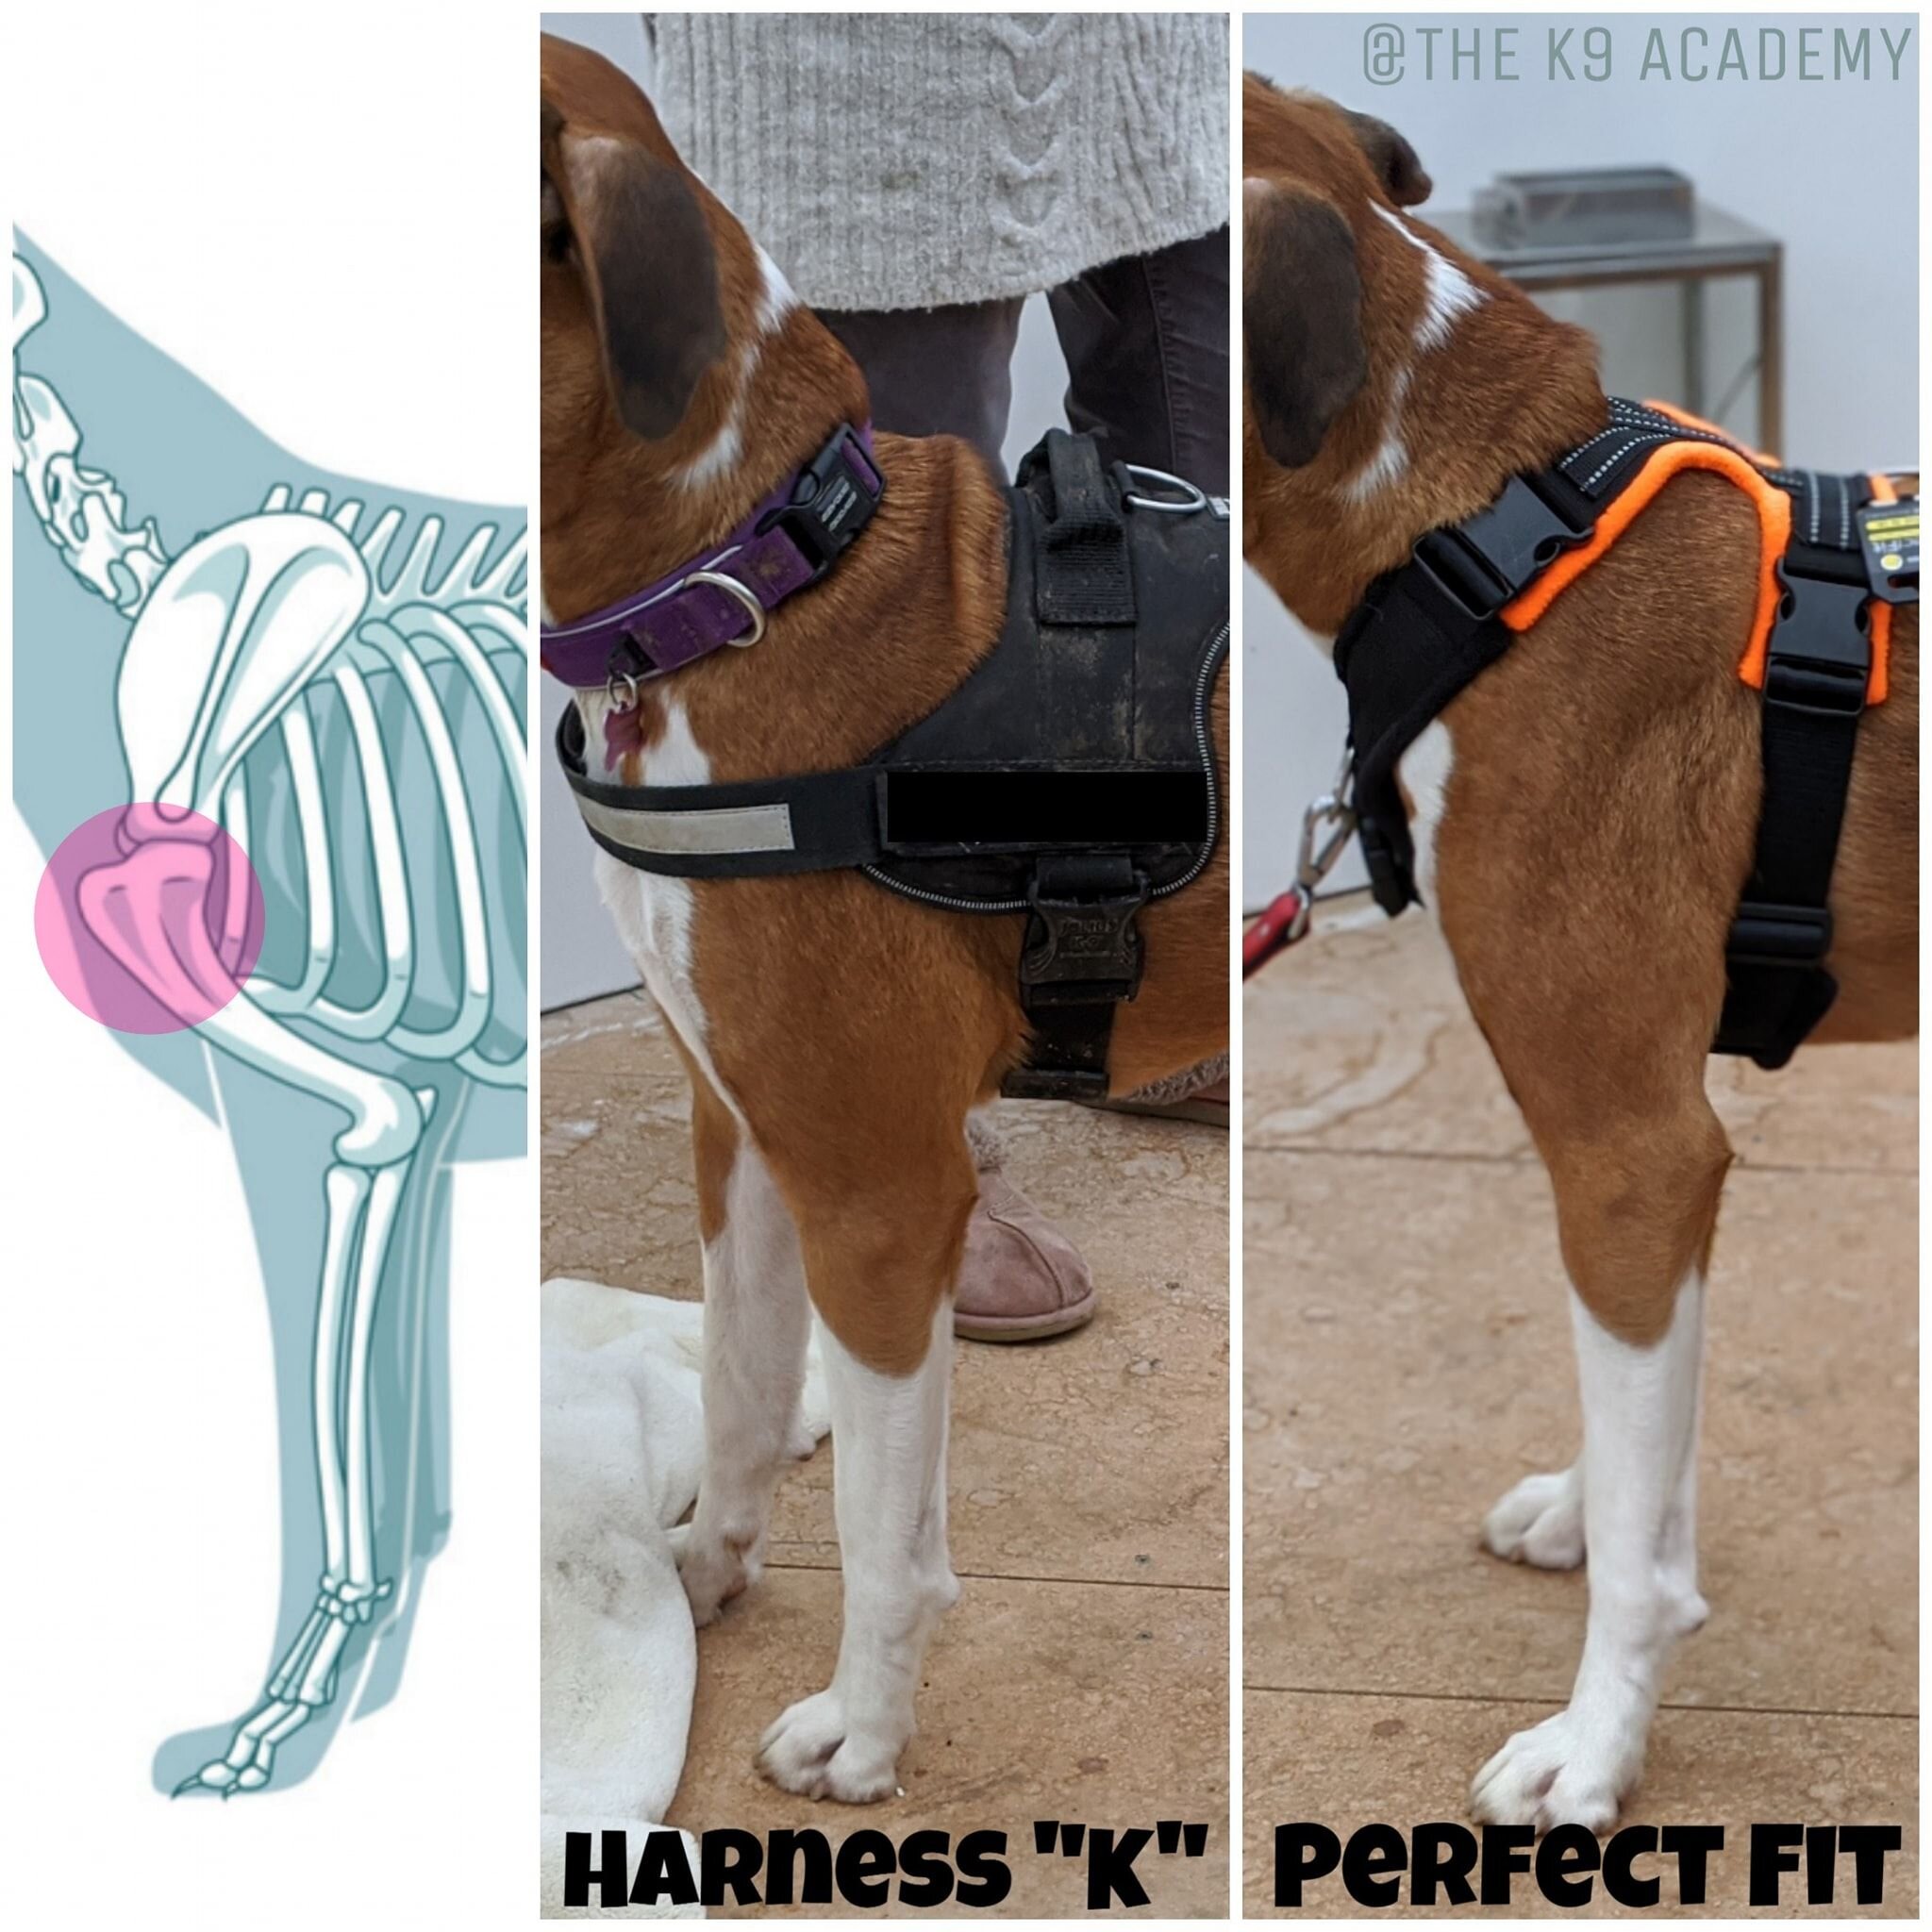 Don't Jerk or Pull, Use a Harness- Part 4/4 — Welfare For Animals